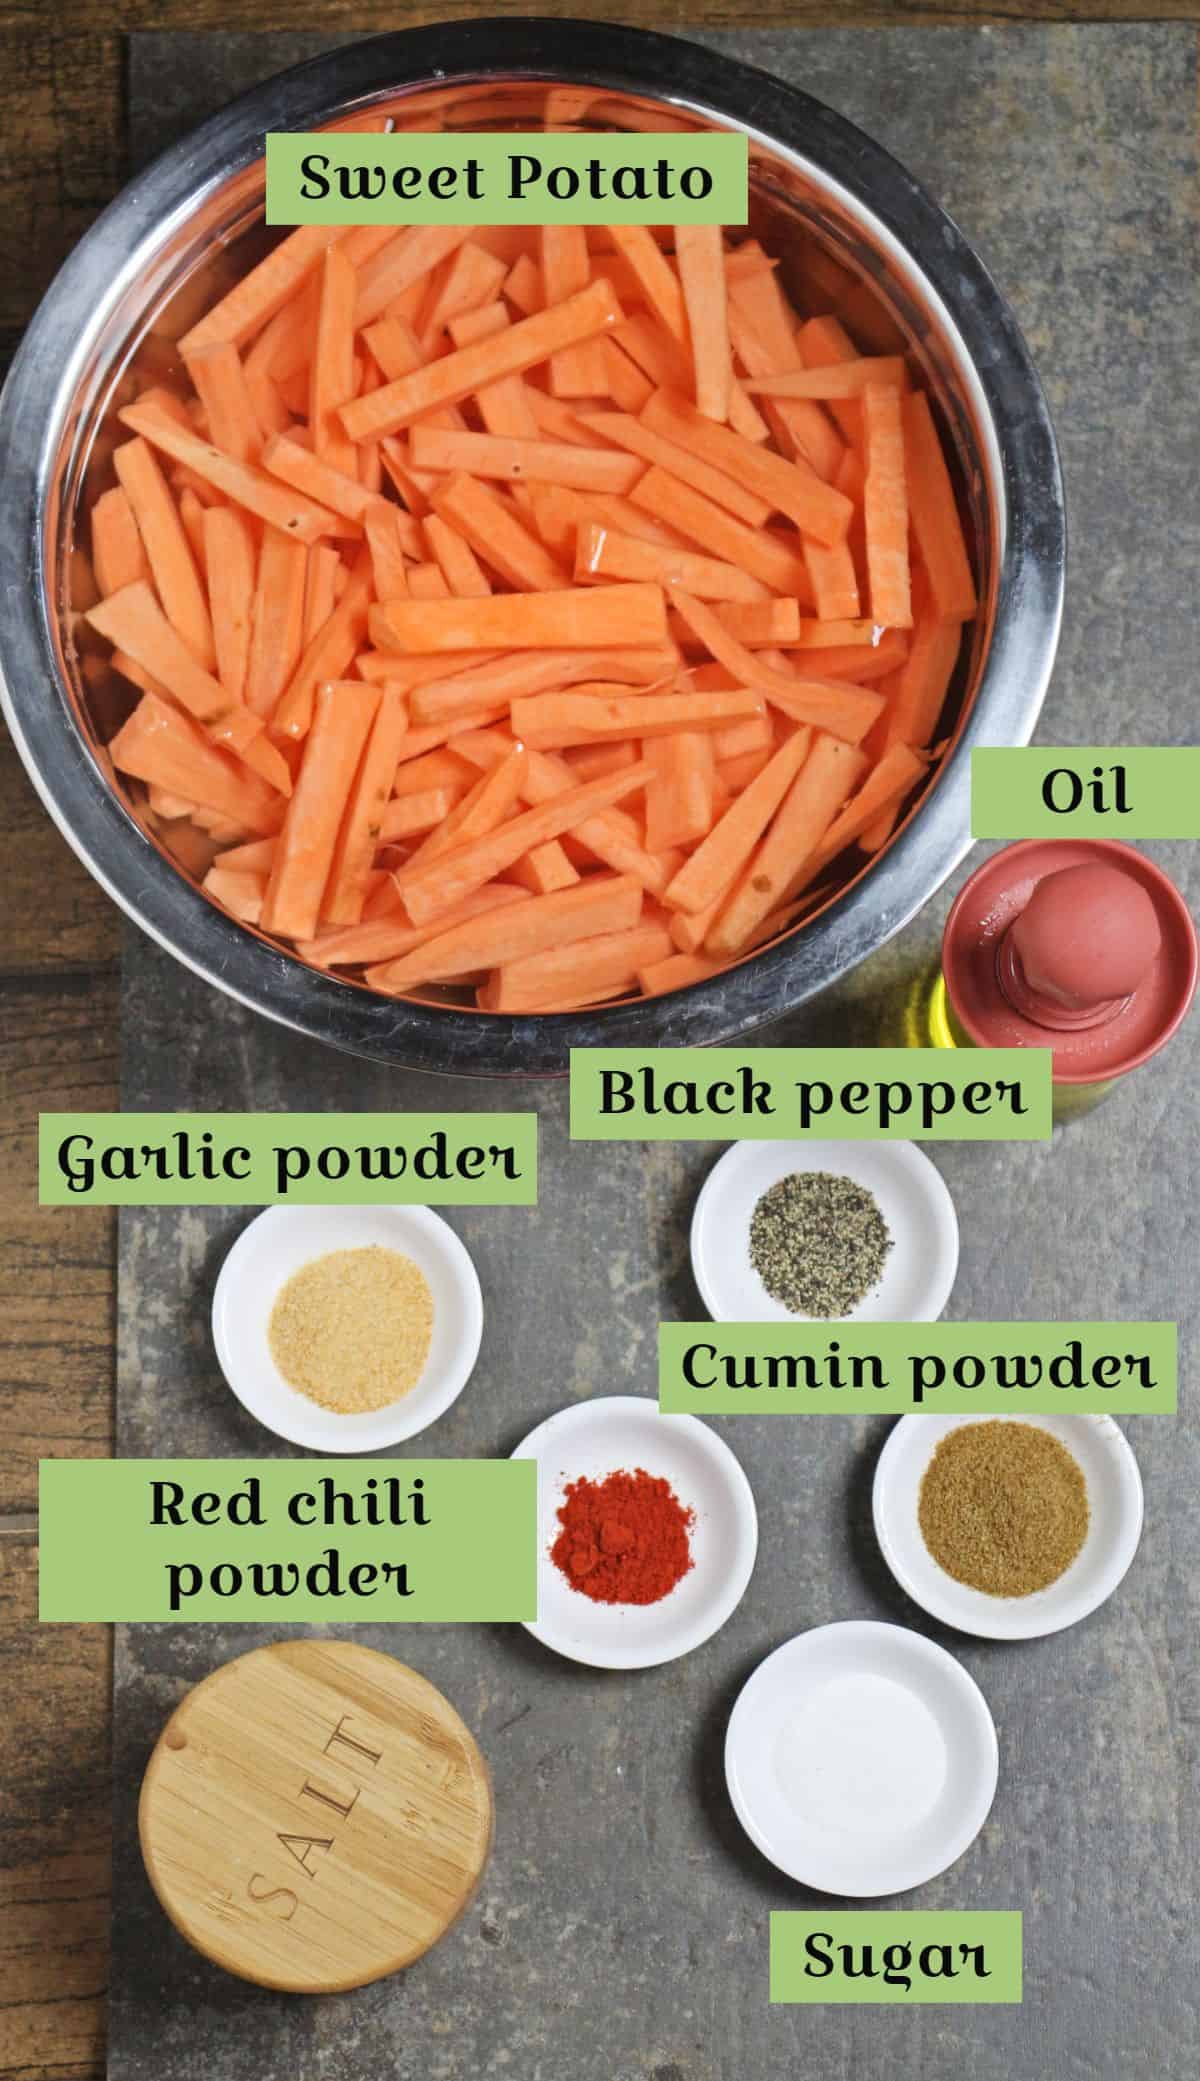 Ingredients labeled for sweet potato fries